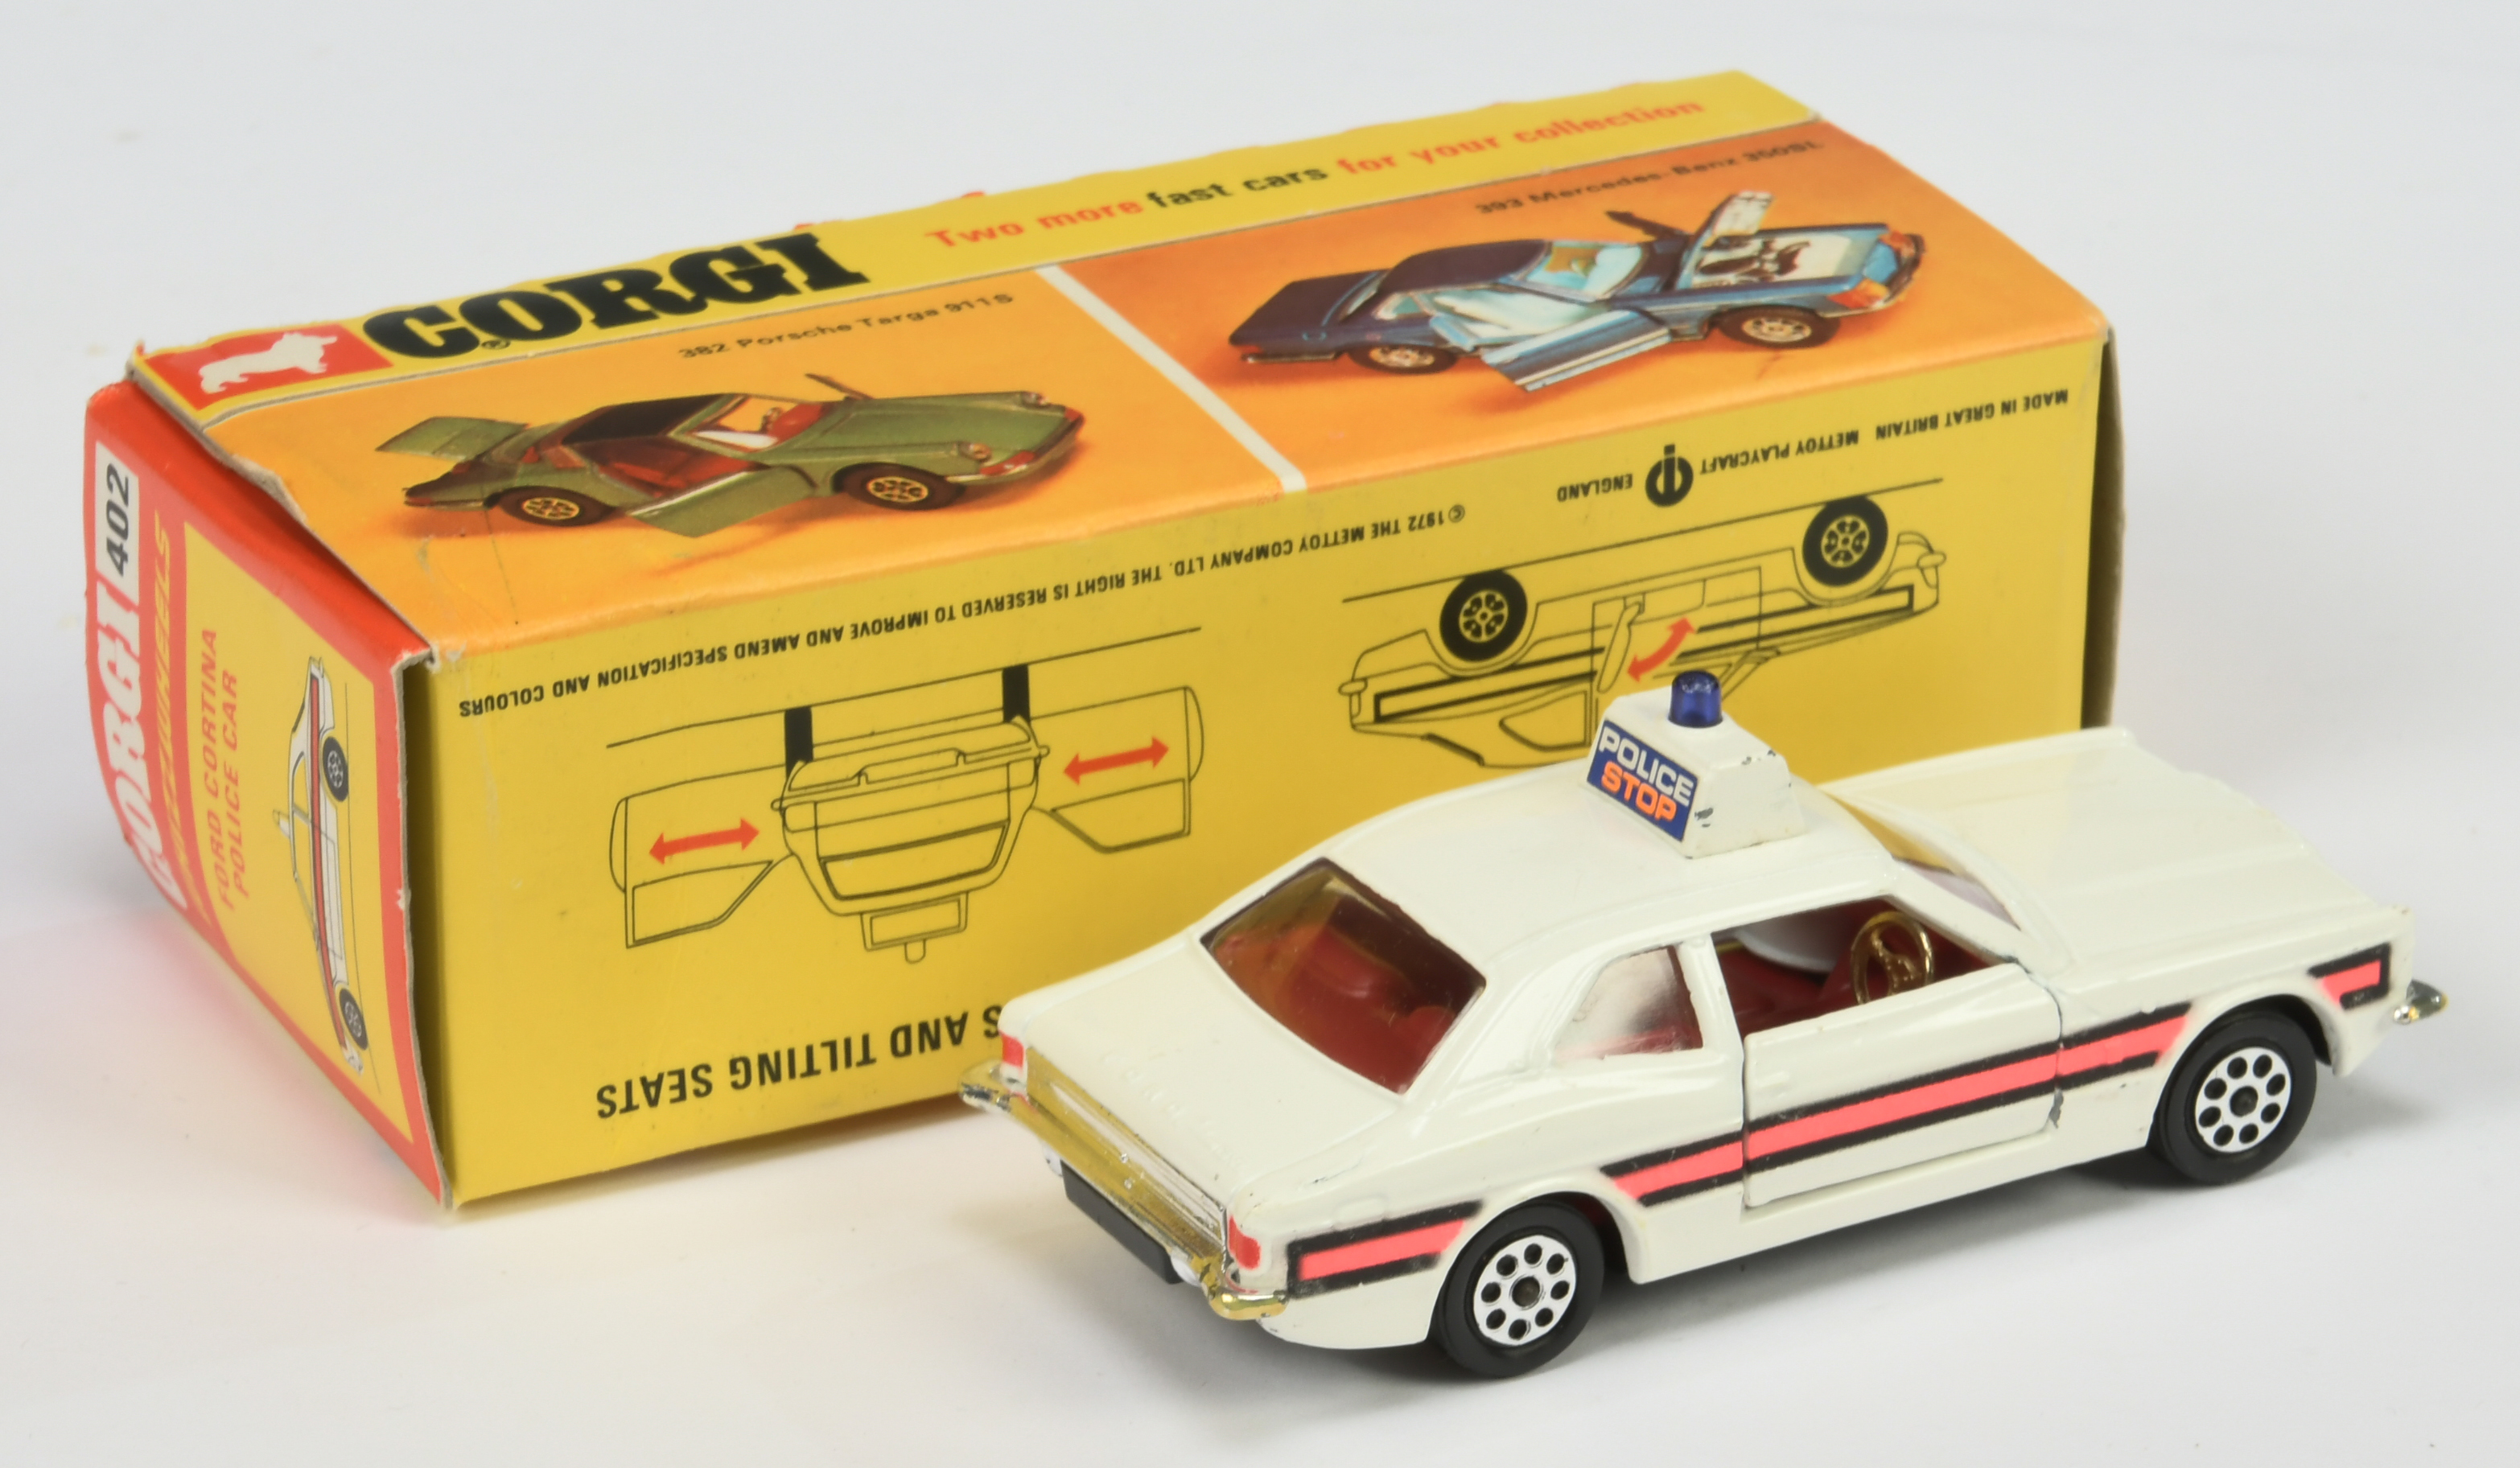 Corgi Toys 402 Ford Cortina "Police" Car - White body, red interior, black base, roof box and lig... - Image 2 of 2